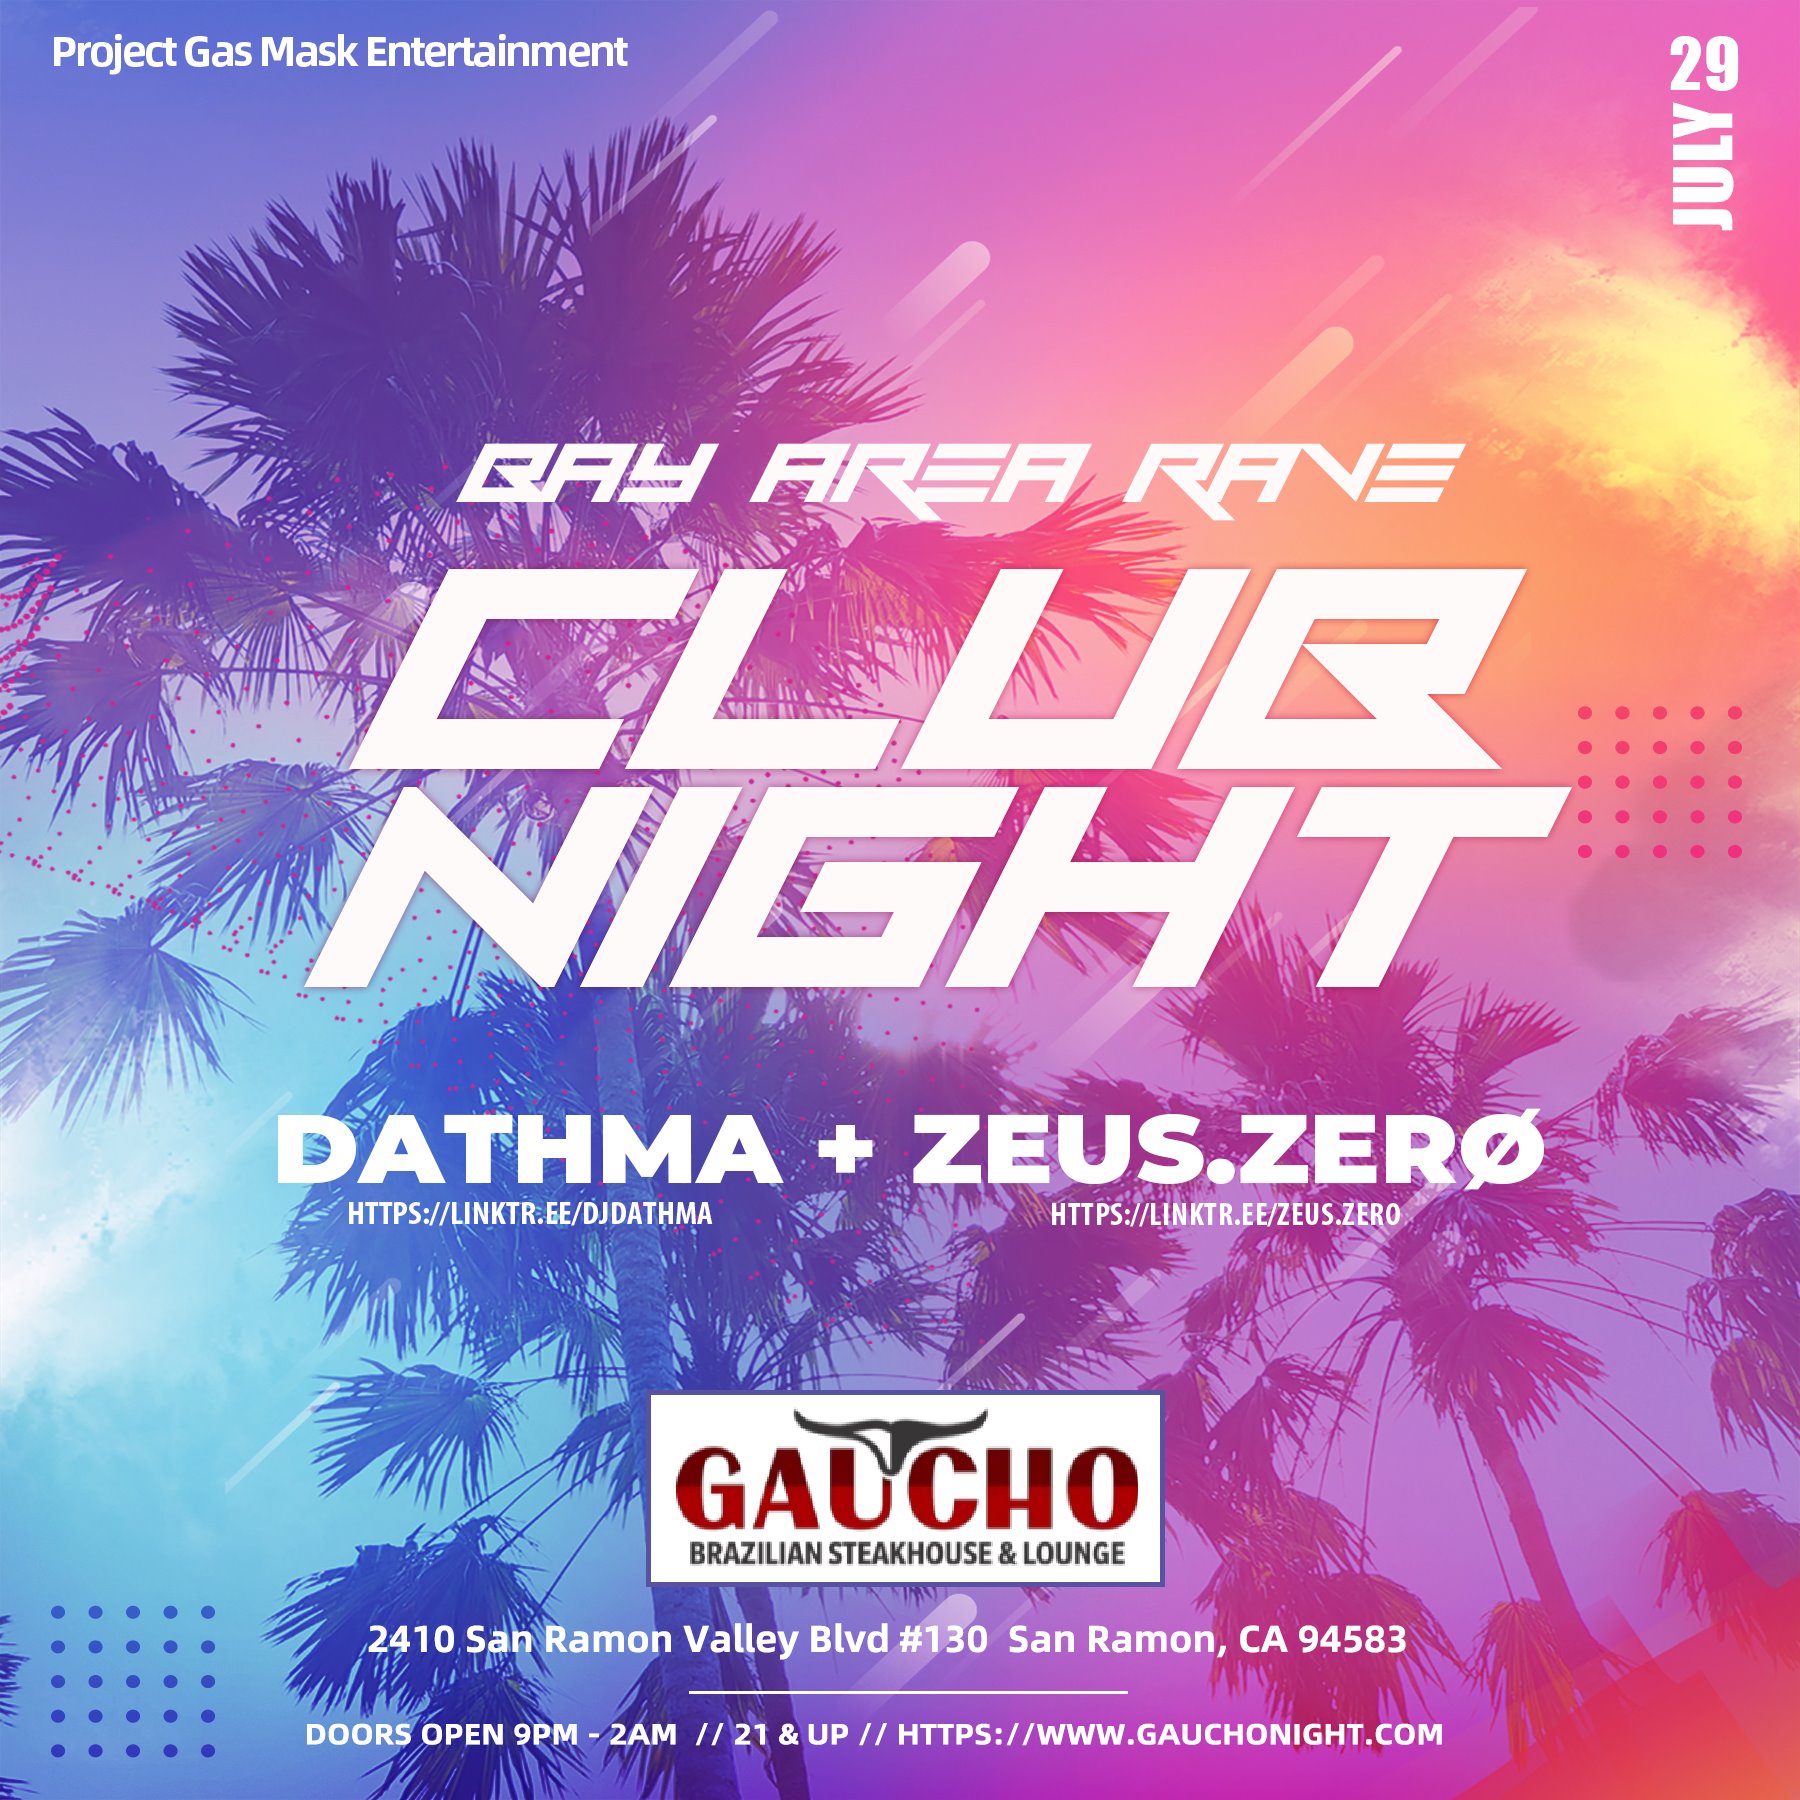 Bay Area RAVE CLUB NIGHT (By Project Gas Mask Entertainment ) at